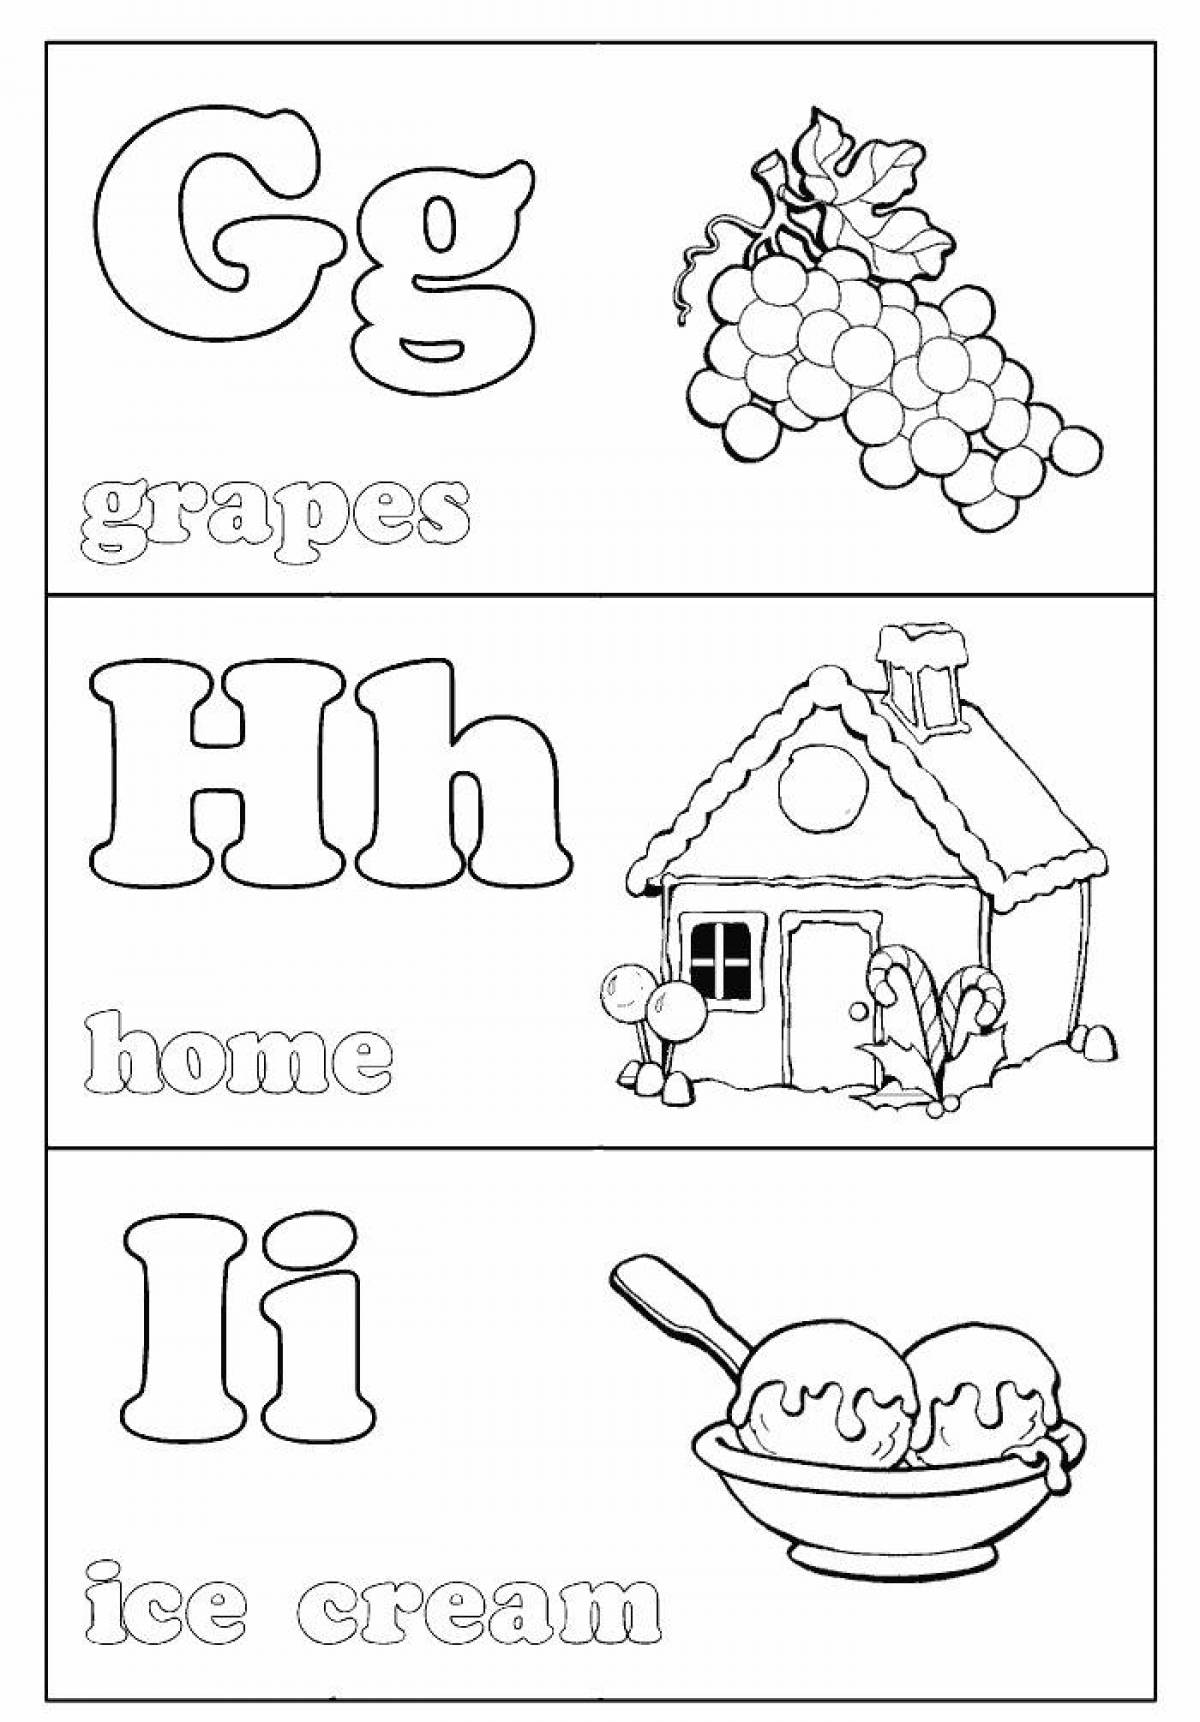 Bright coloring of the English alphabet for children